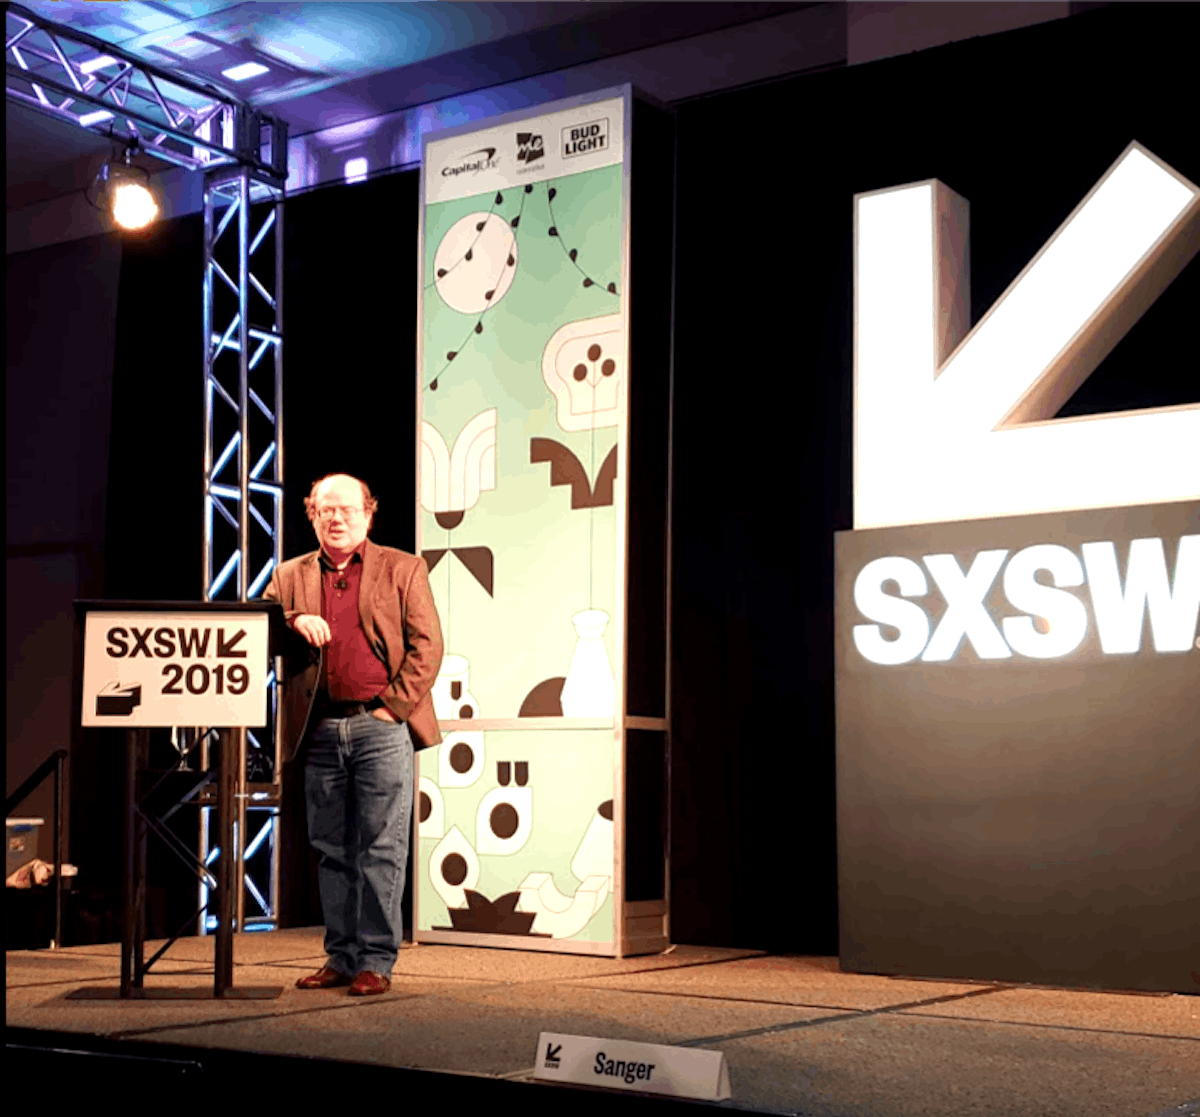 featured image - Wikipedia Co-Founder and Others Debate Blockchain Technology and Data Ownership at SXSW